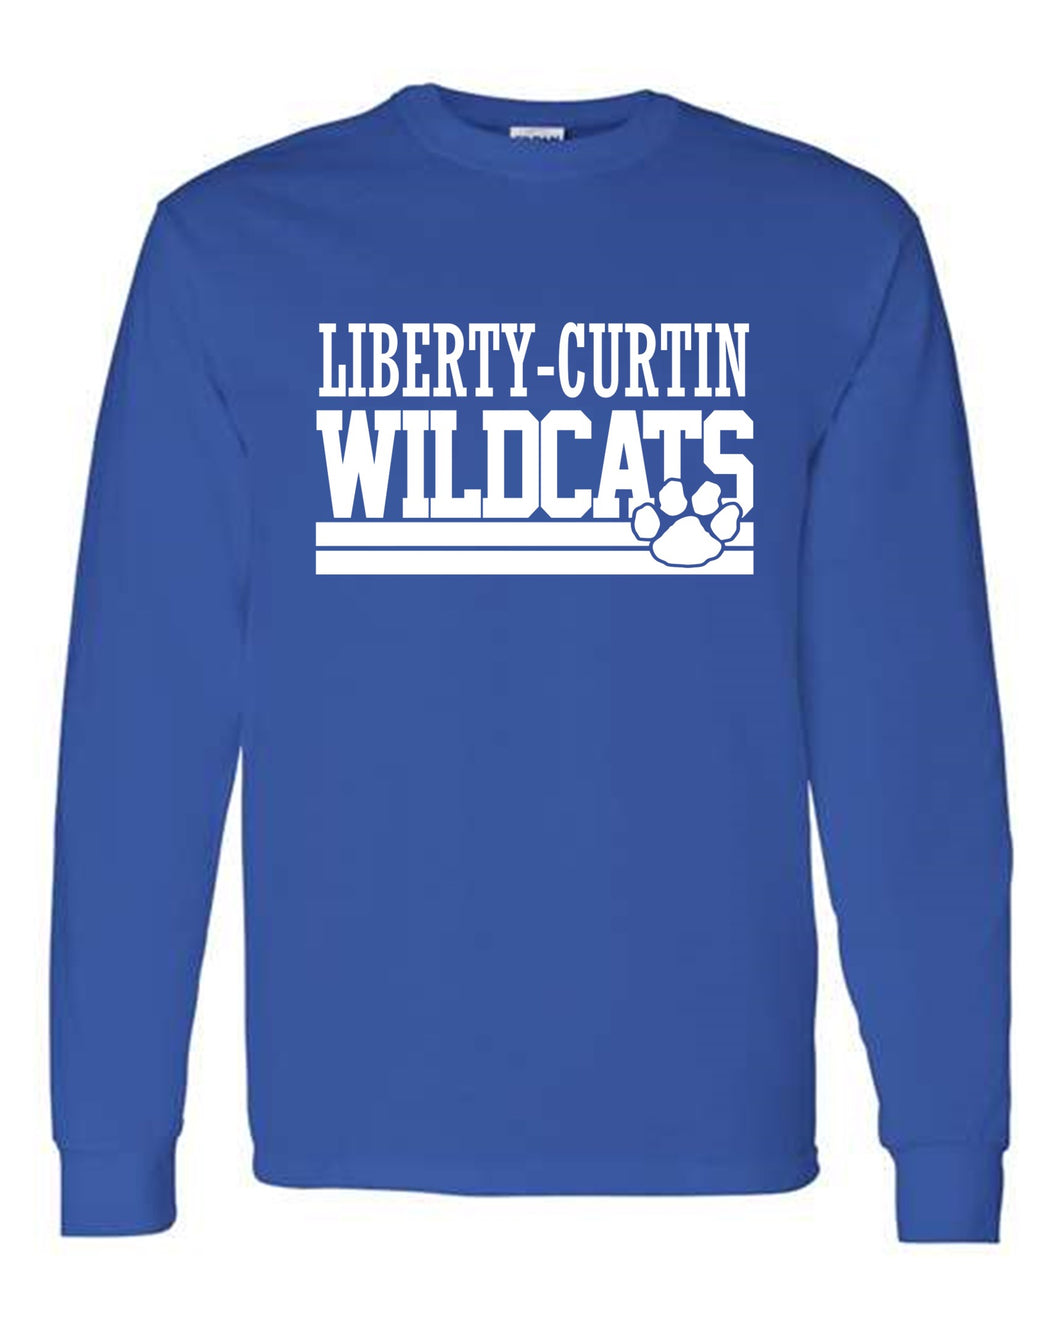 Wildcats (Option to add LC or CM) Long Sleeve